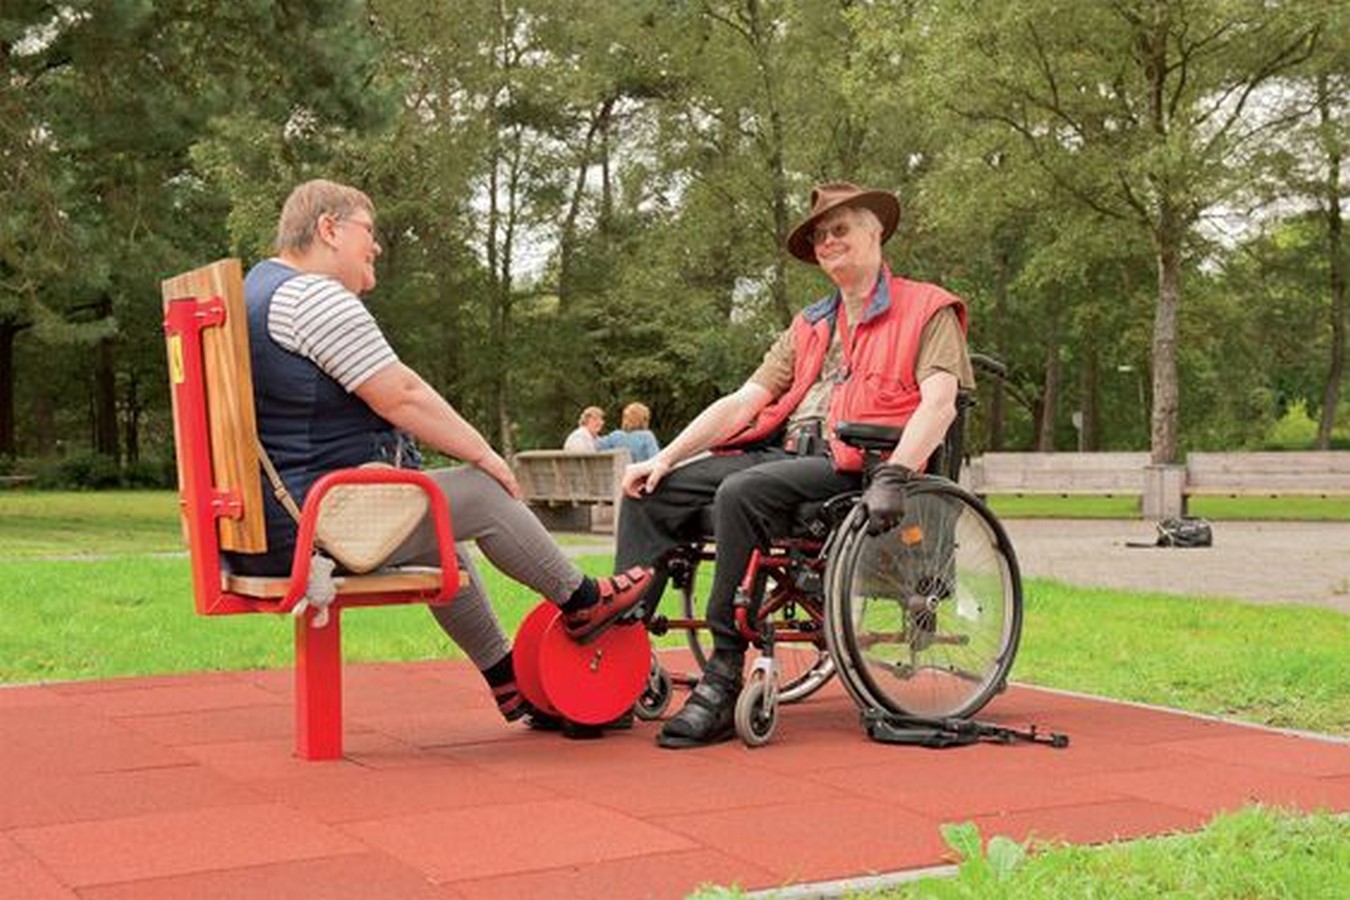  10 things to remember while designing Parks for the disabled - Sheet3